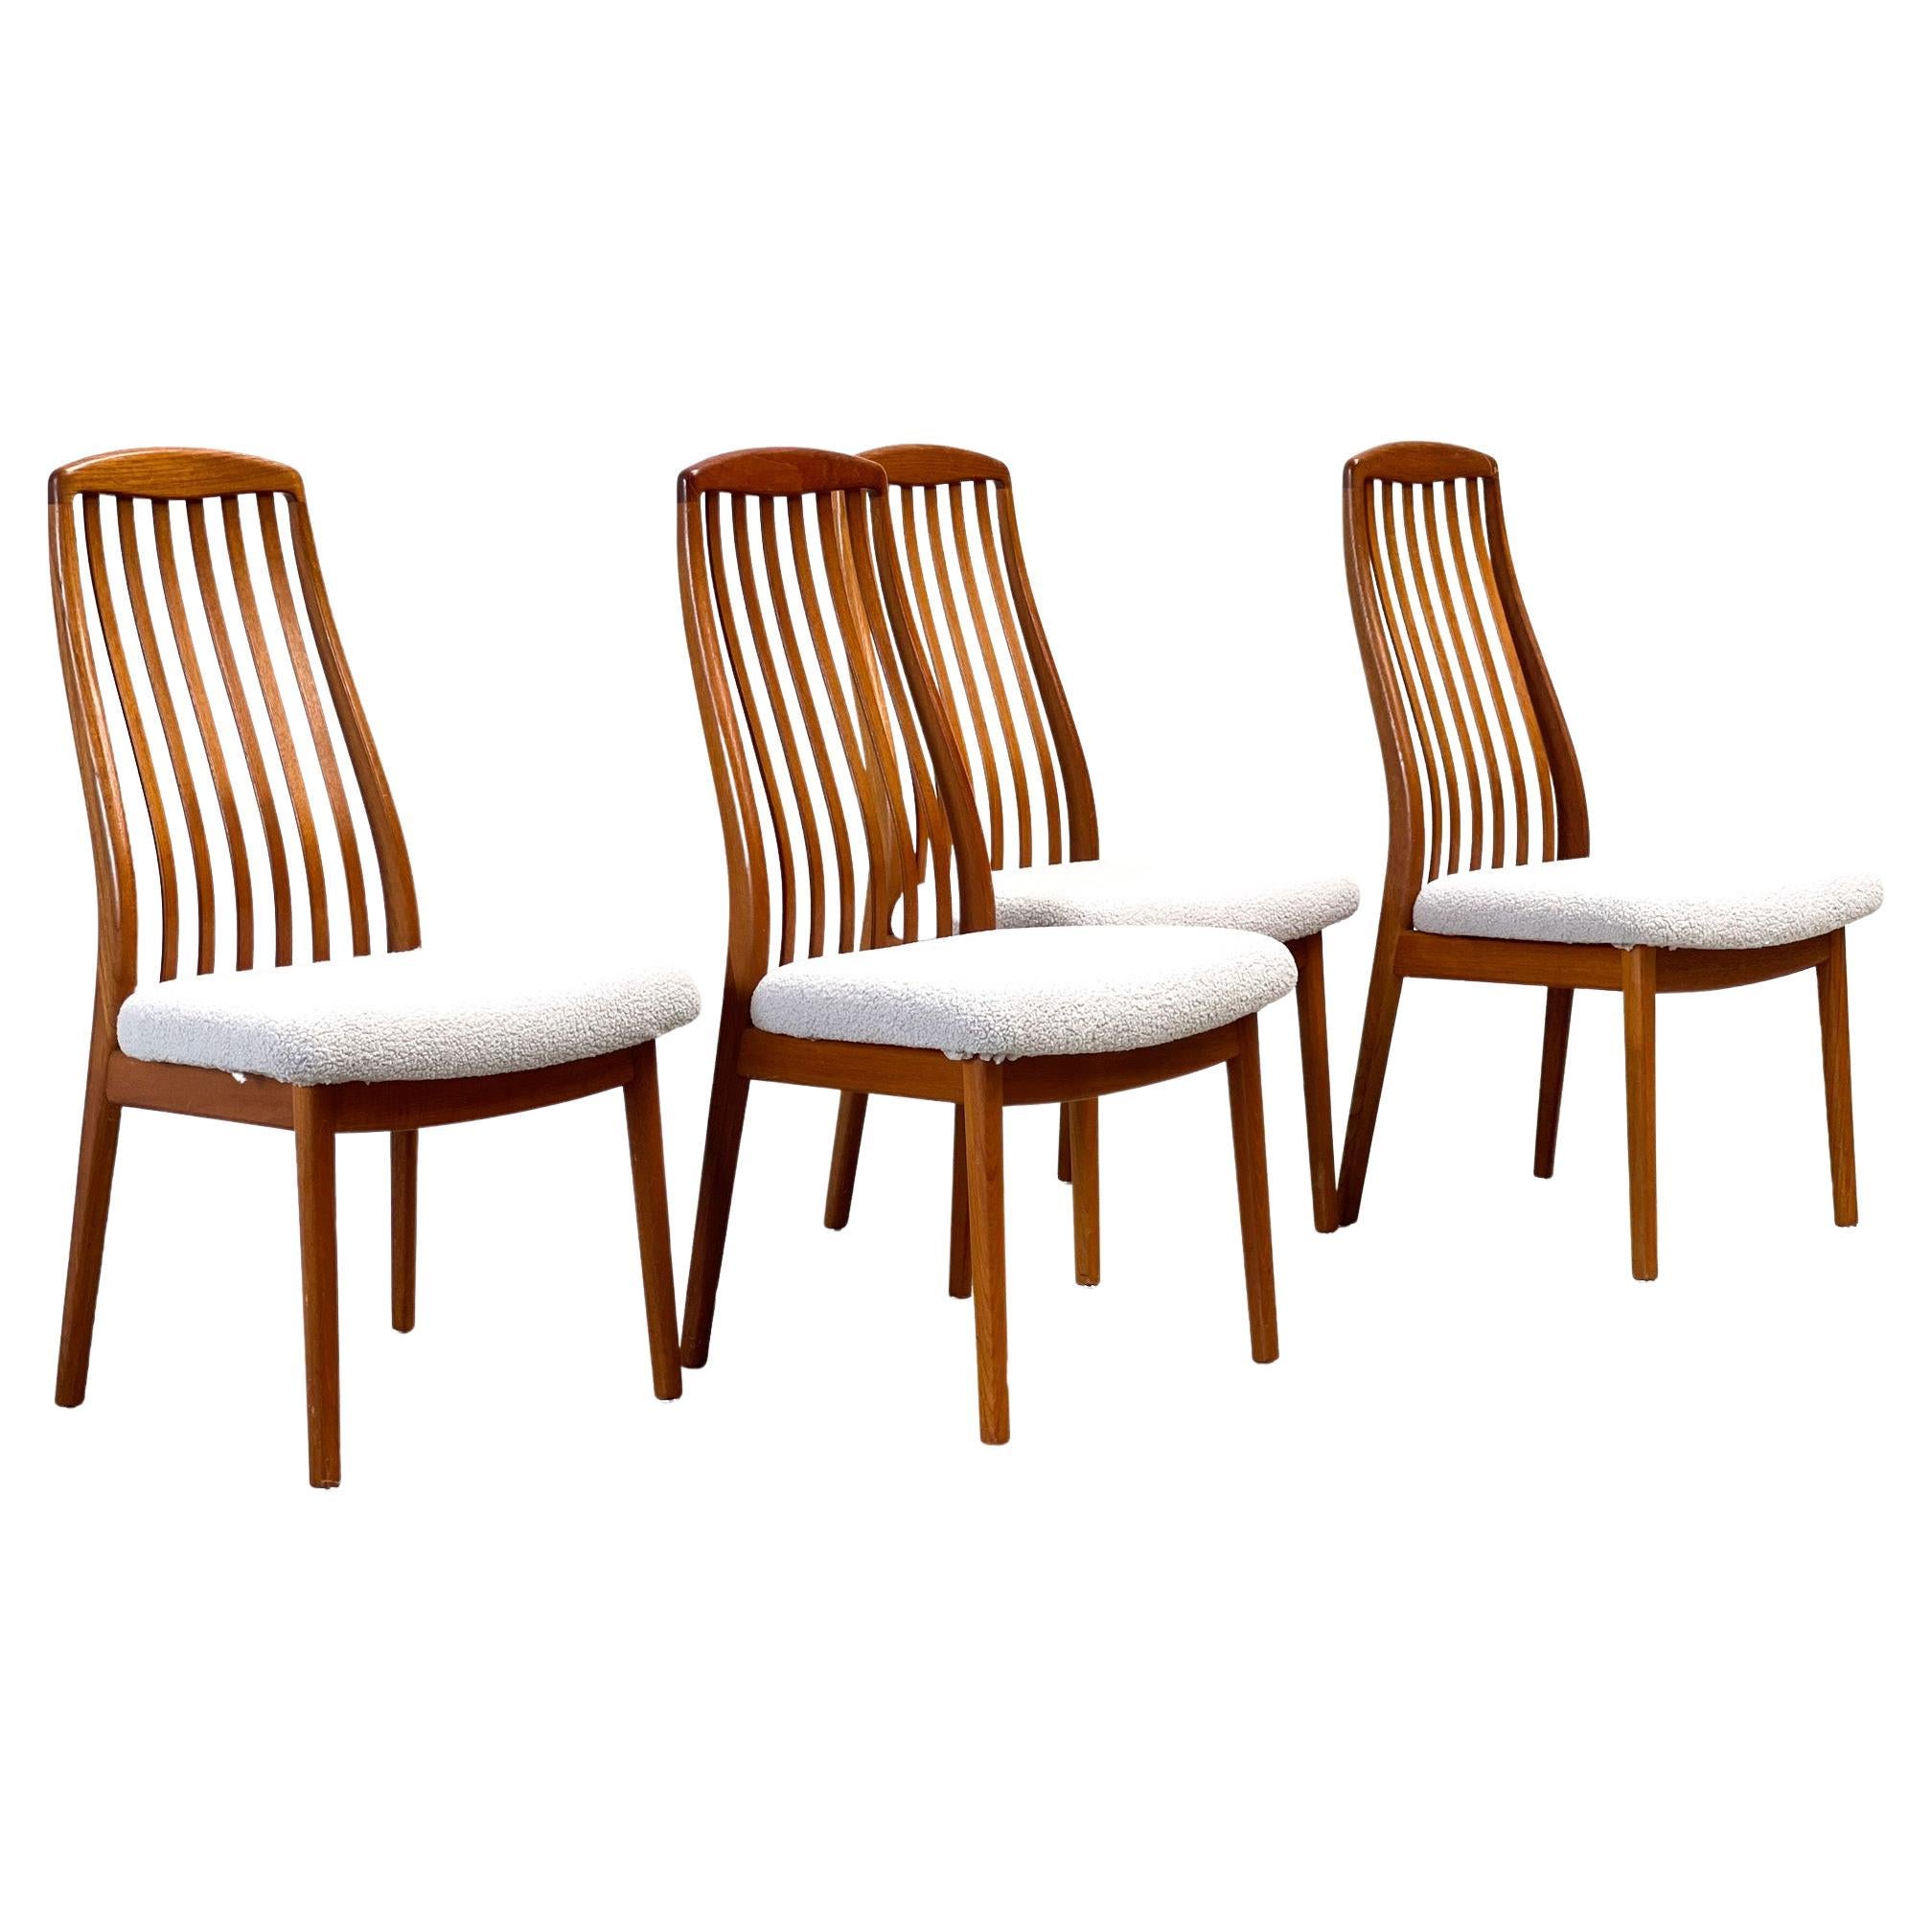 4 dining chairs by Preben Shou Denmark For Sale